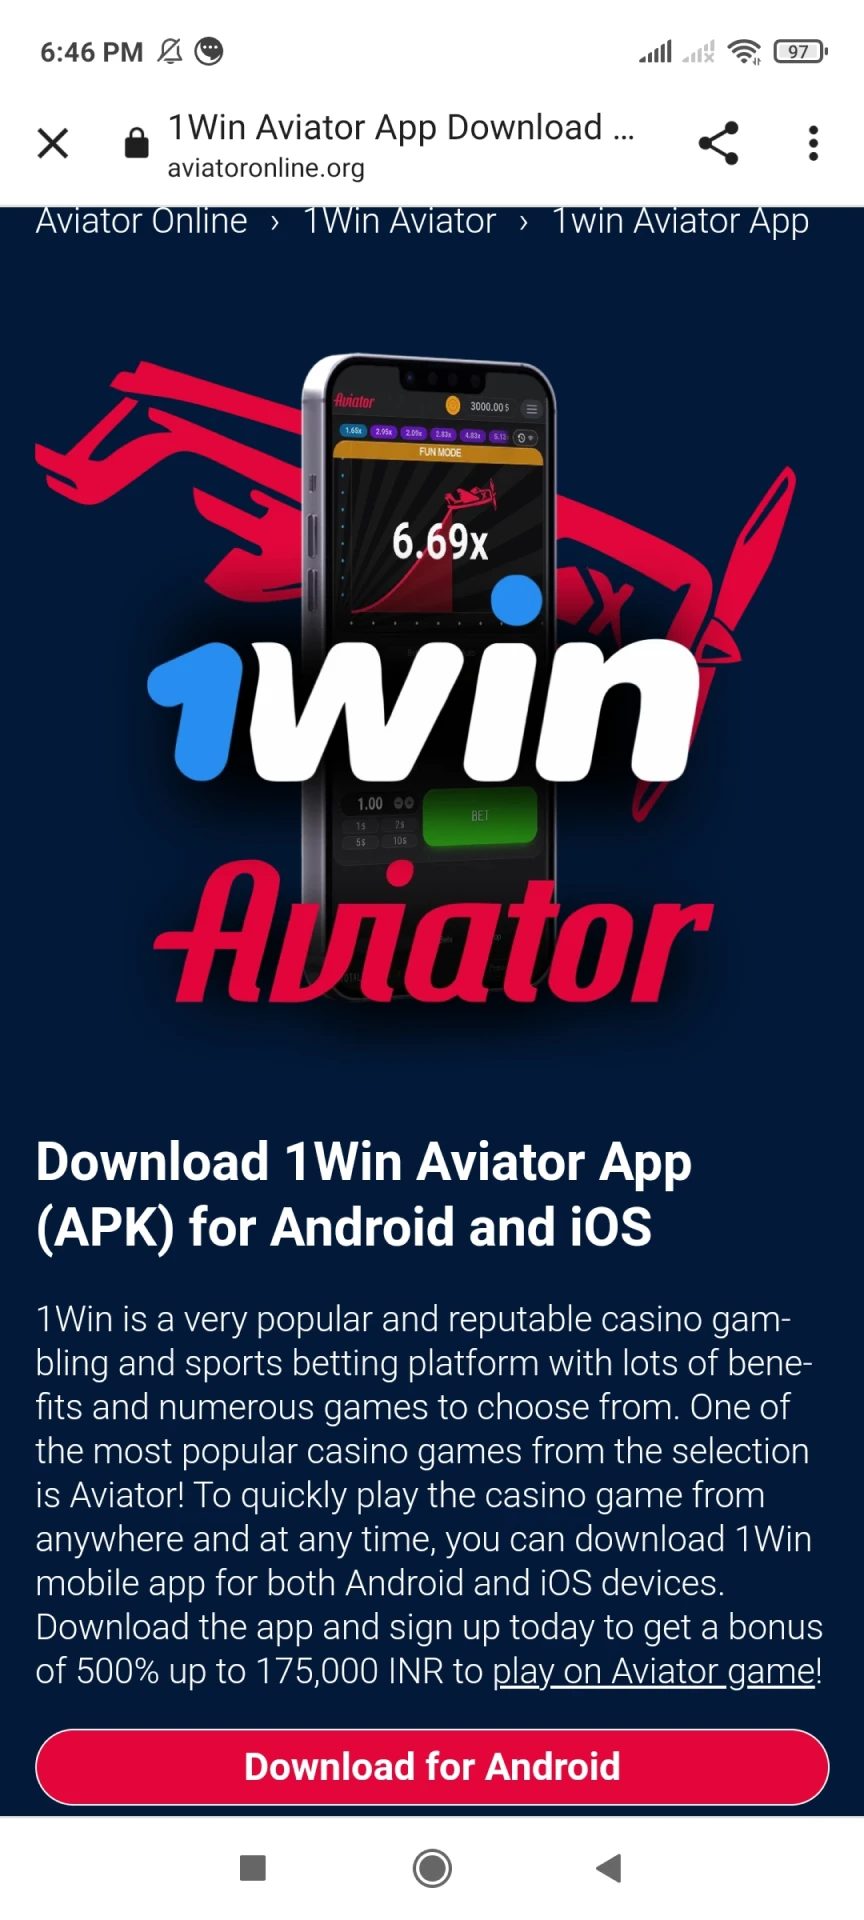 Follow the link to download the 1win app.